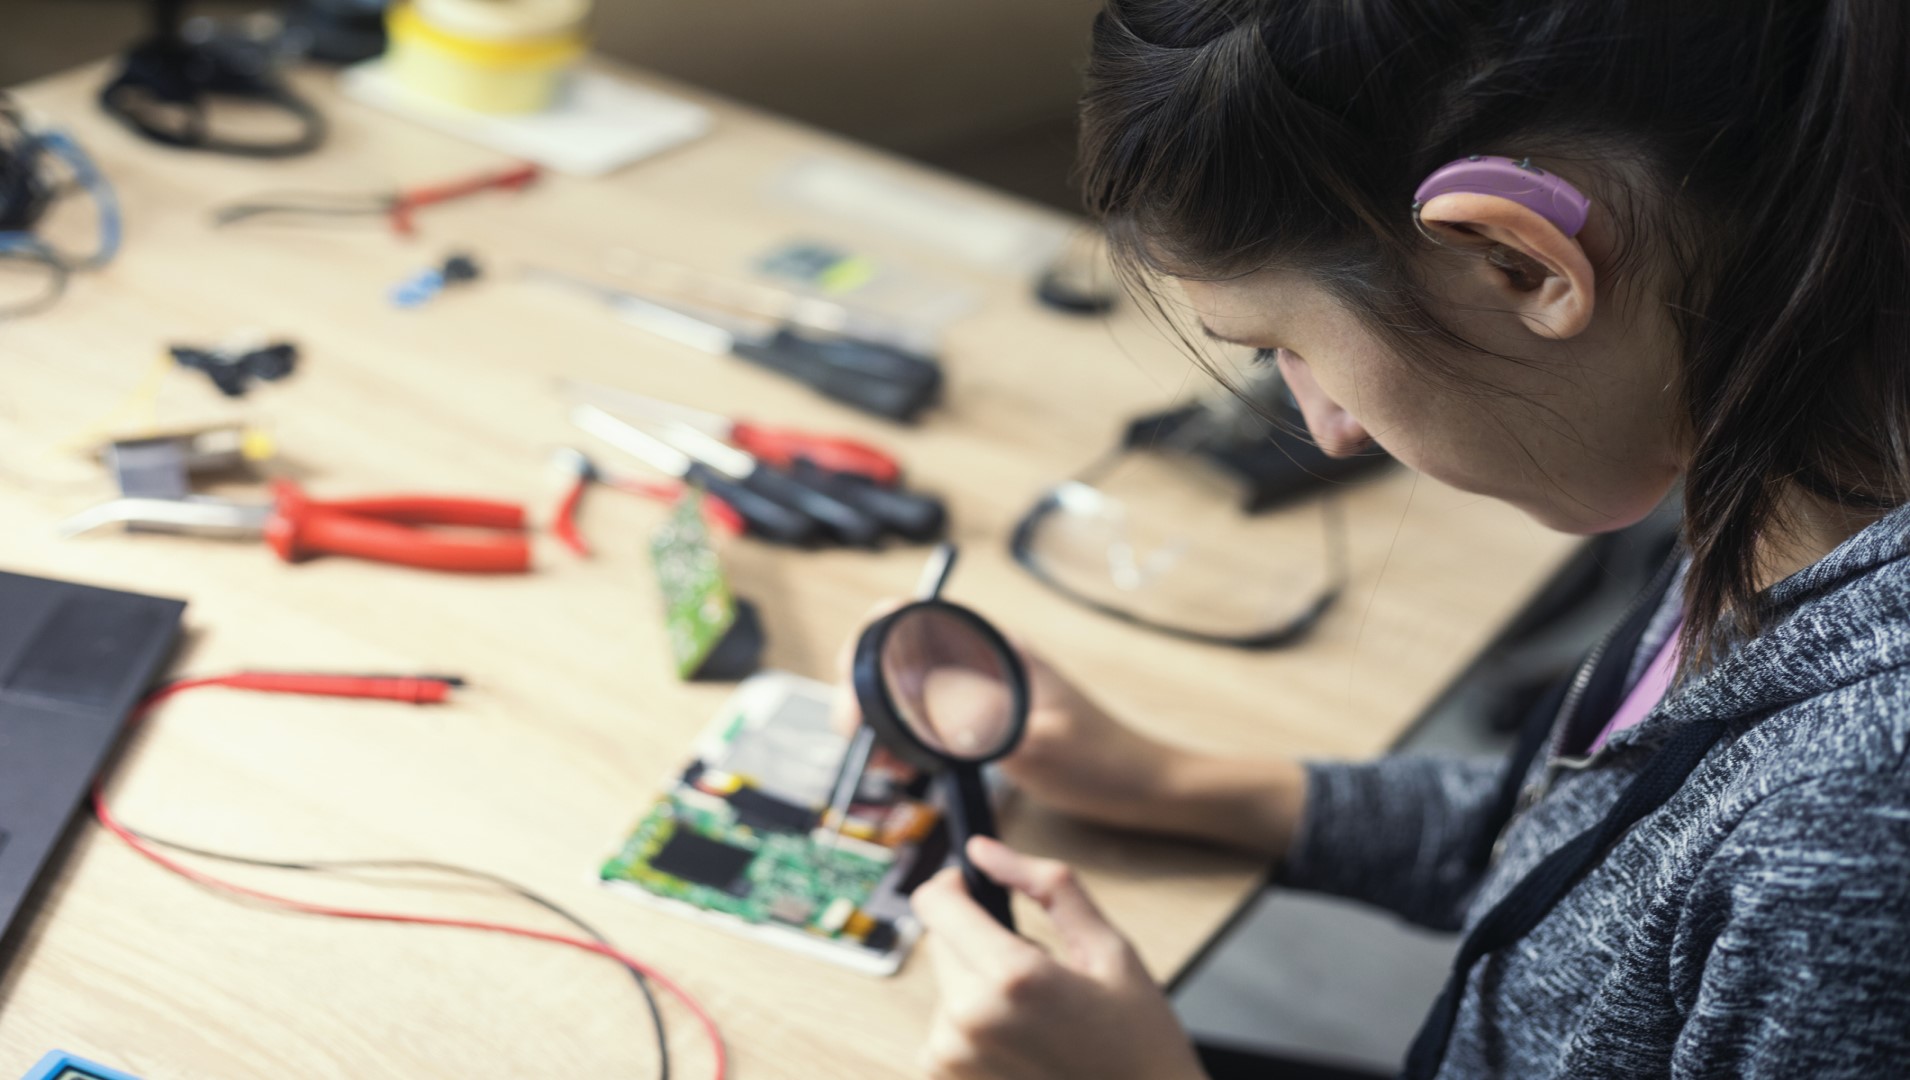 A woman with a hearing impairment working on some electronic repairs at her desk